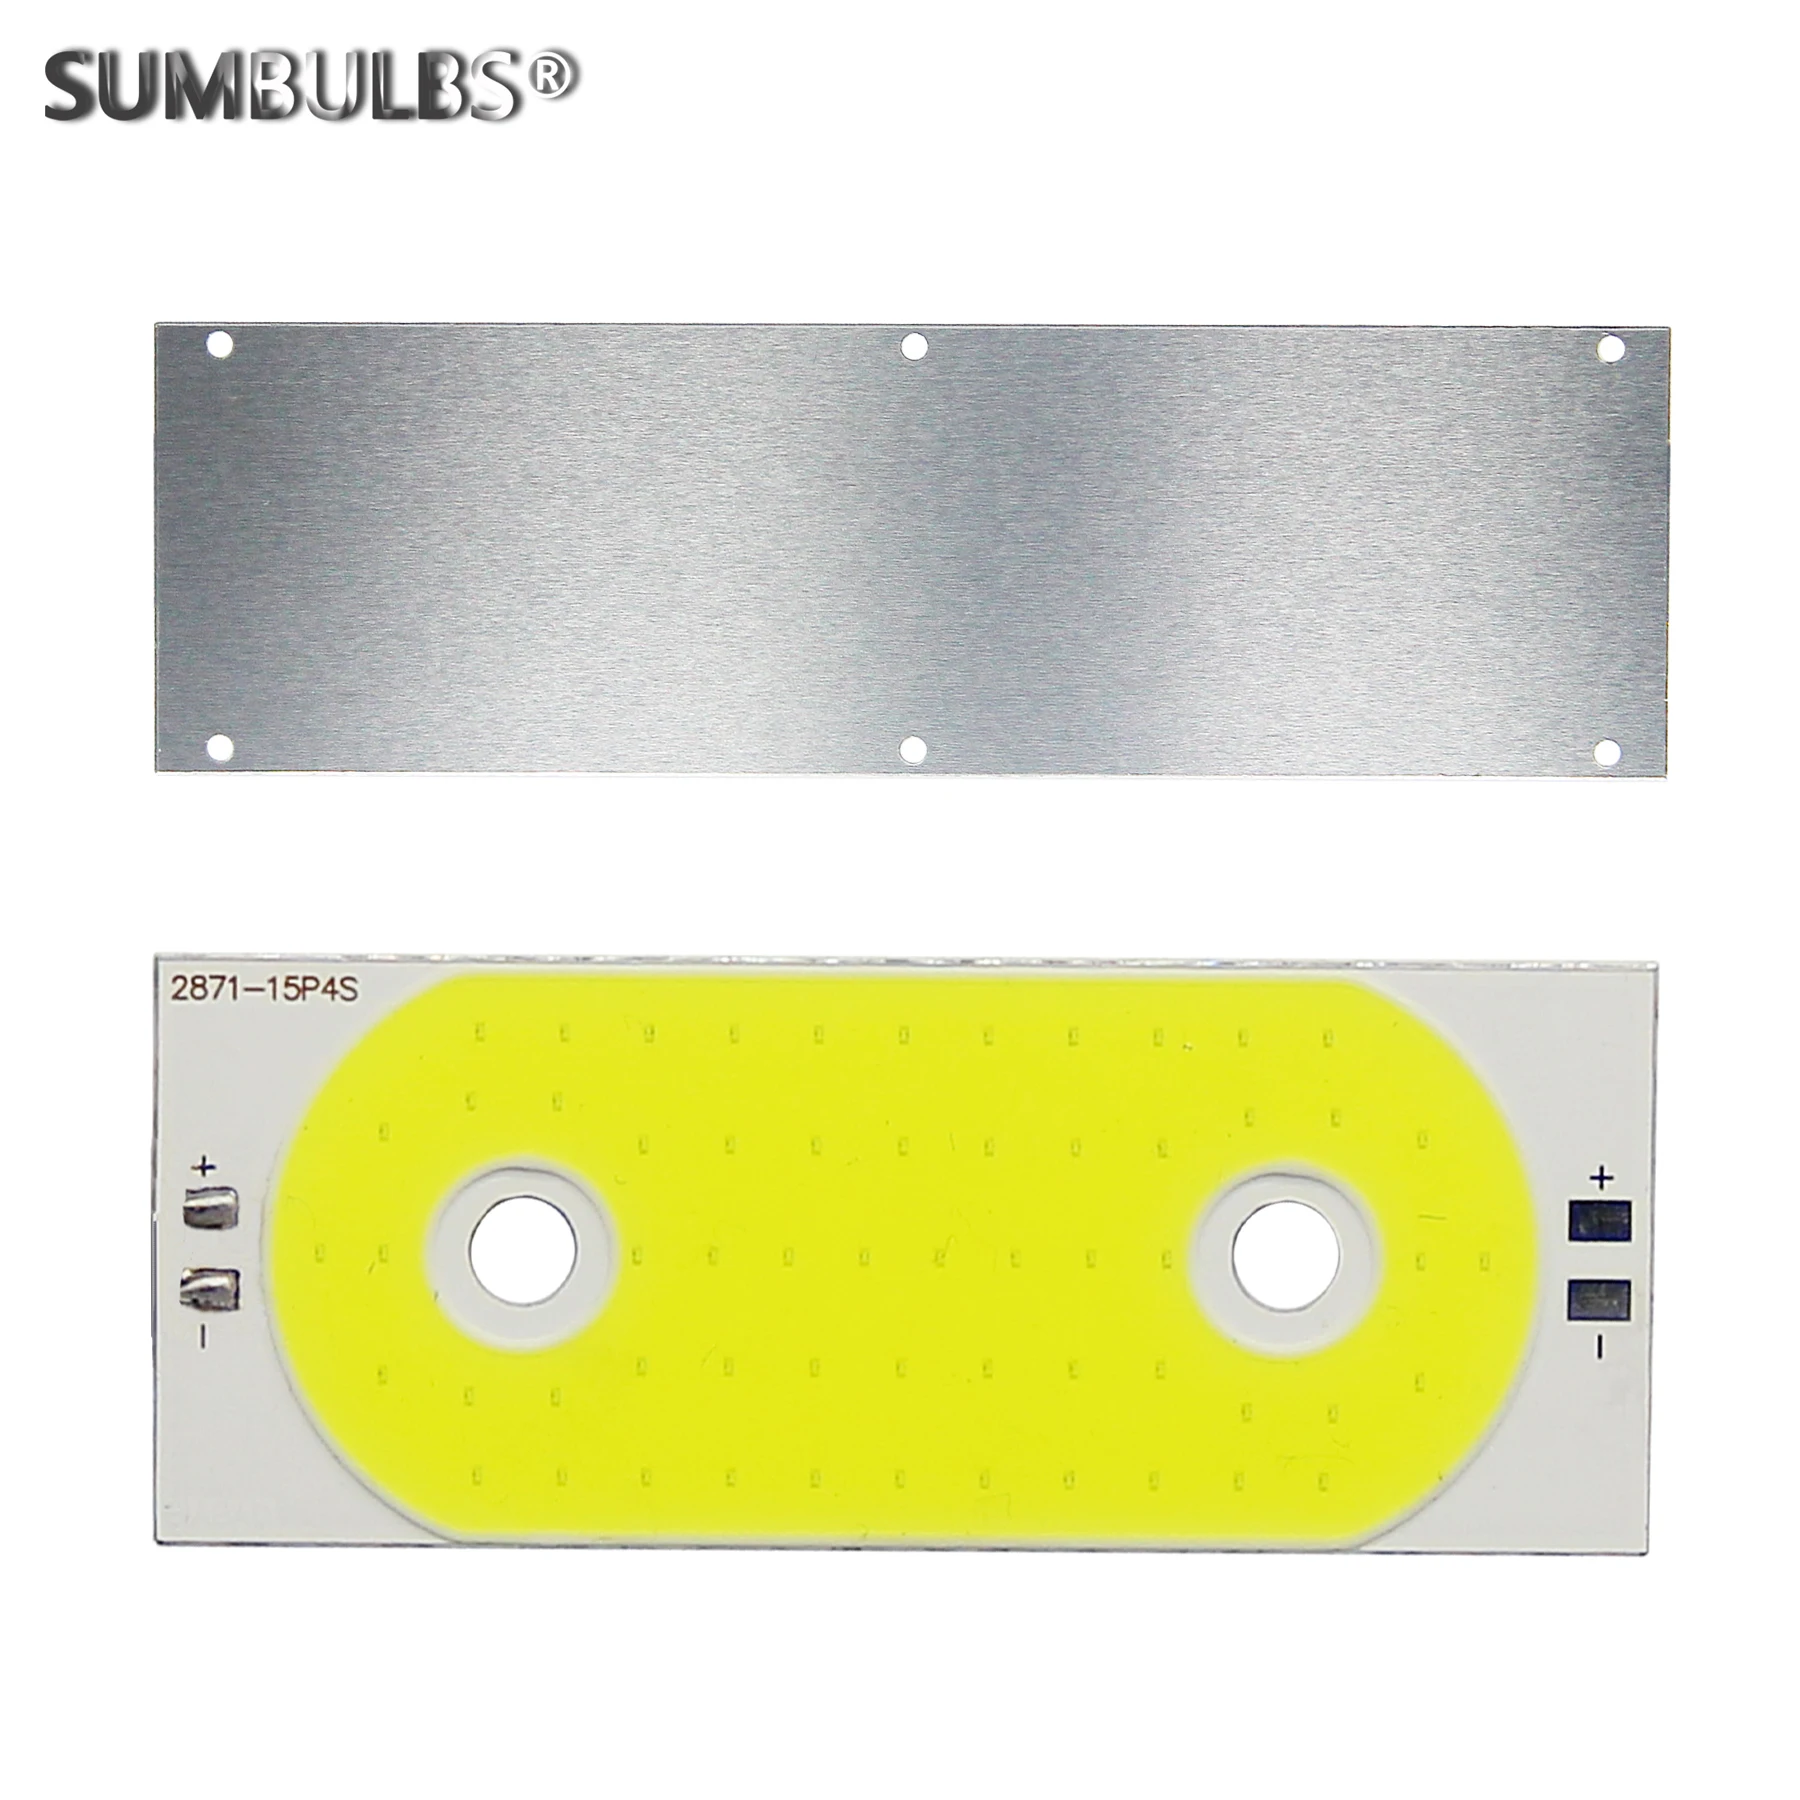 SUMBULBS 71x28mm High Bright 20W LED COB Panel Light Chip with Wires LED BulbSource for DIY Car Lights Outdoor Camping Lamp